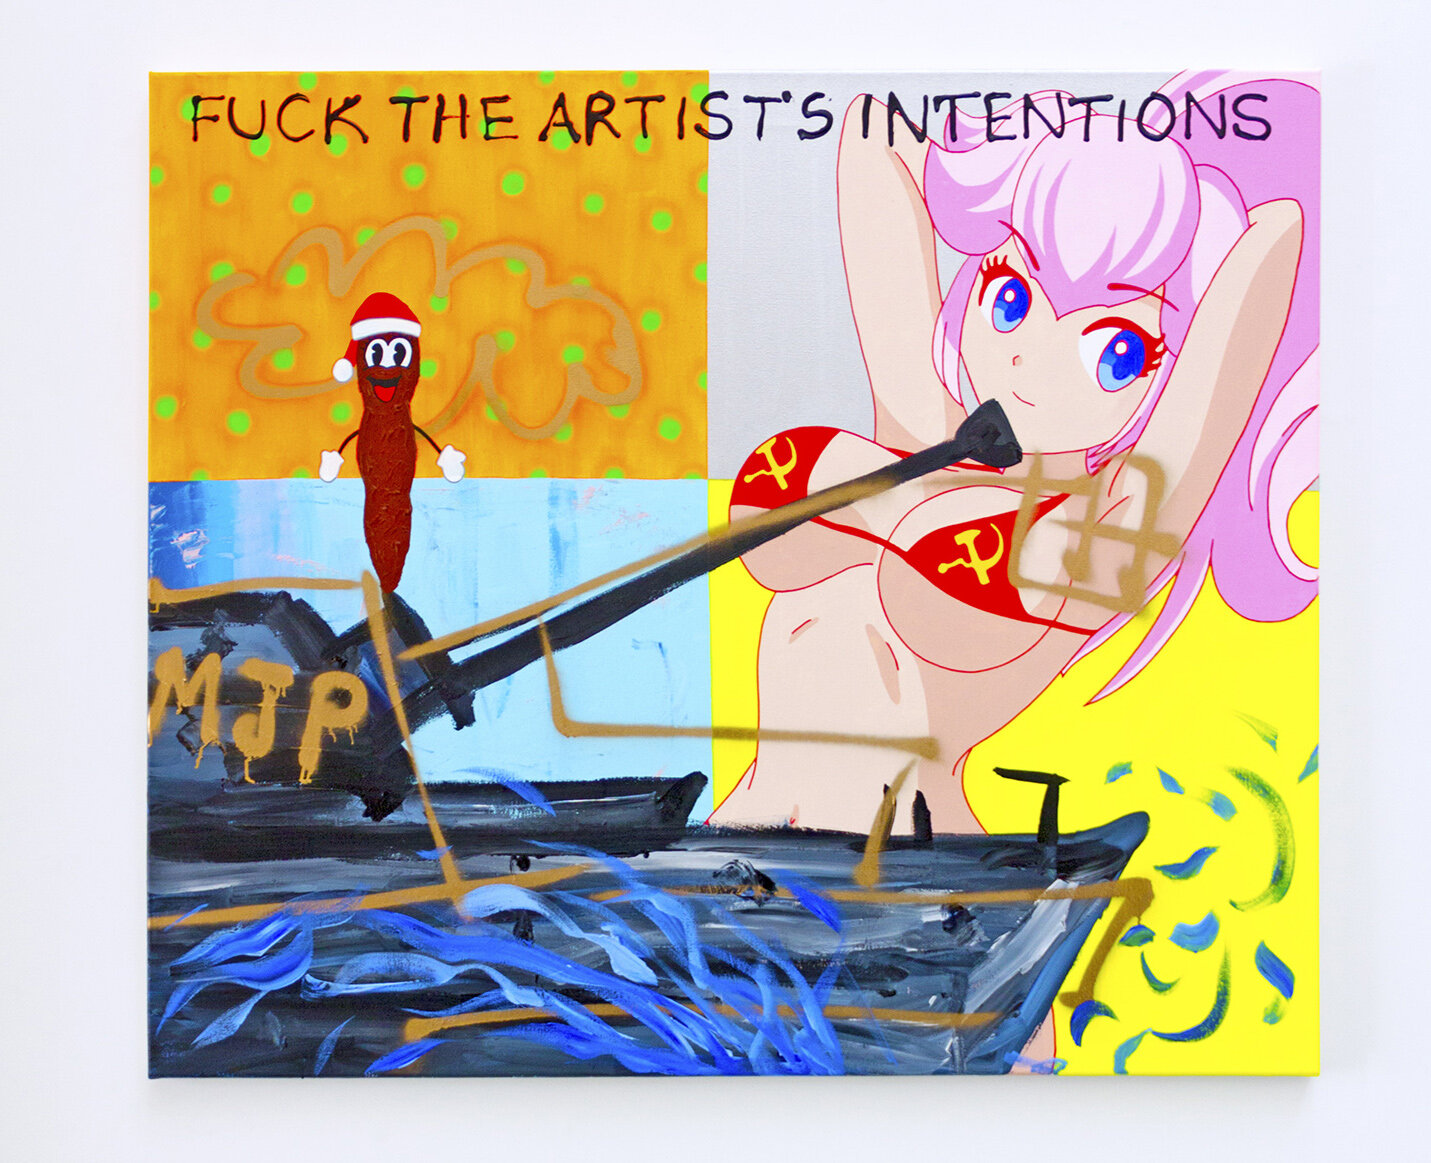 FUCK THE ARTISTS INTENTIONS 2019 Acrylic and spray paint on canvas 110x130cm.jpg